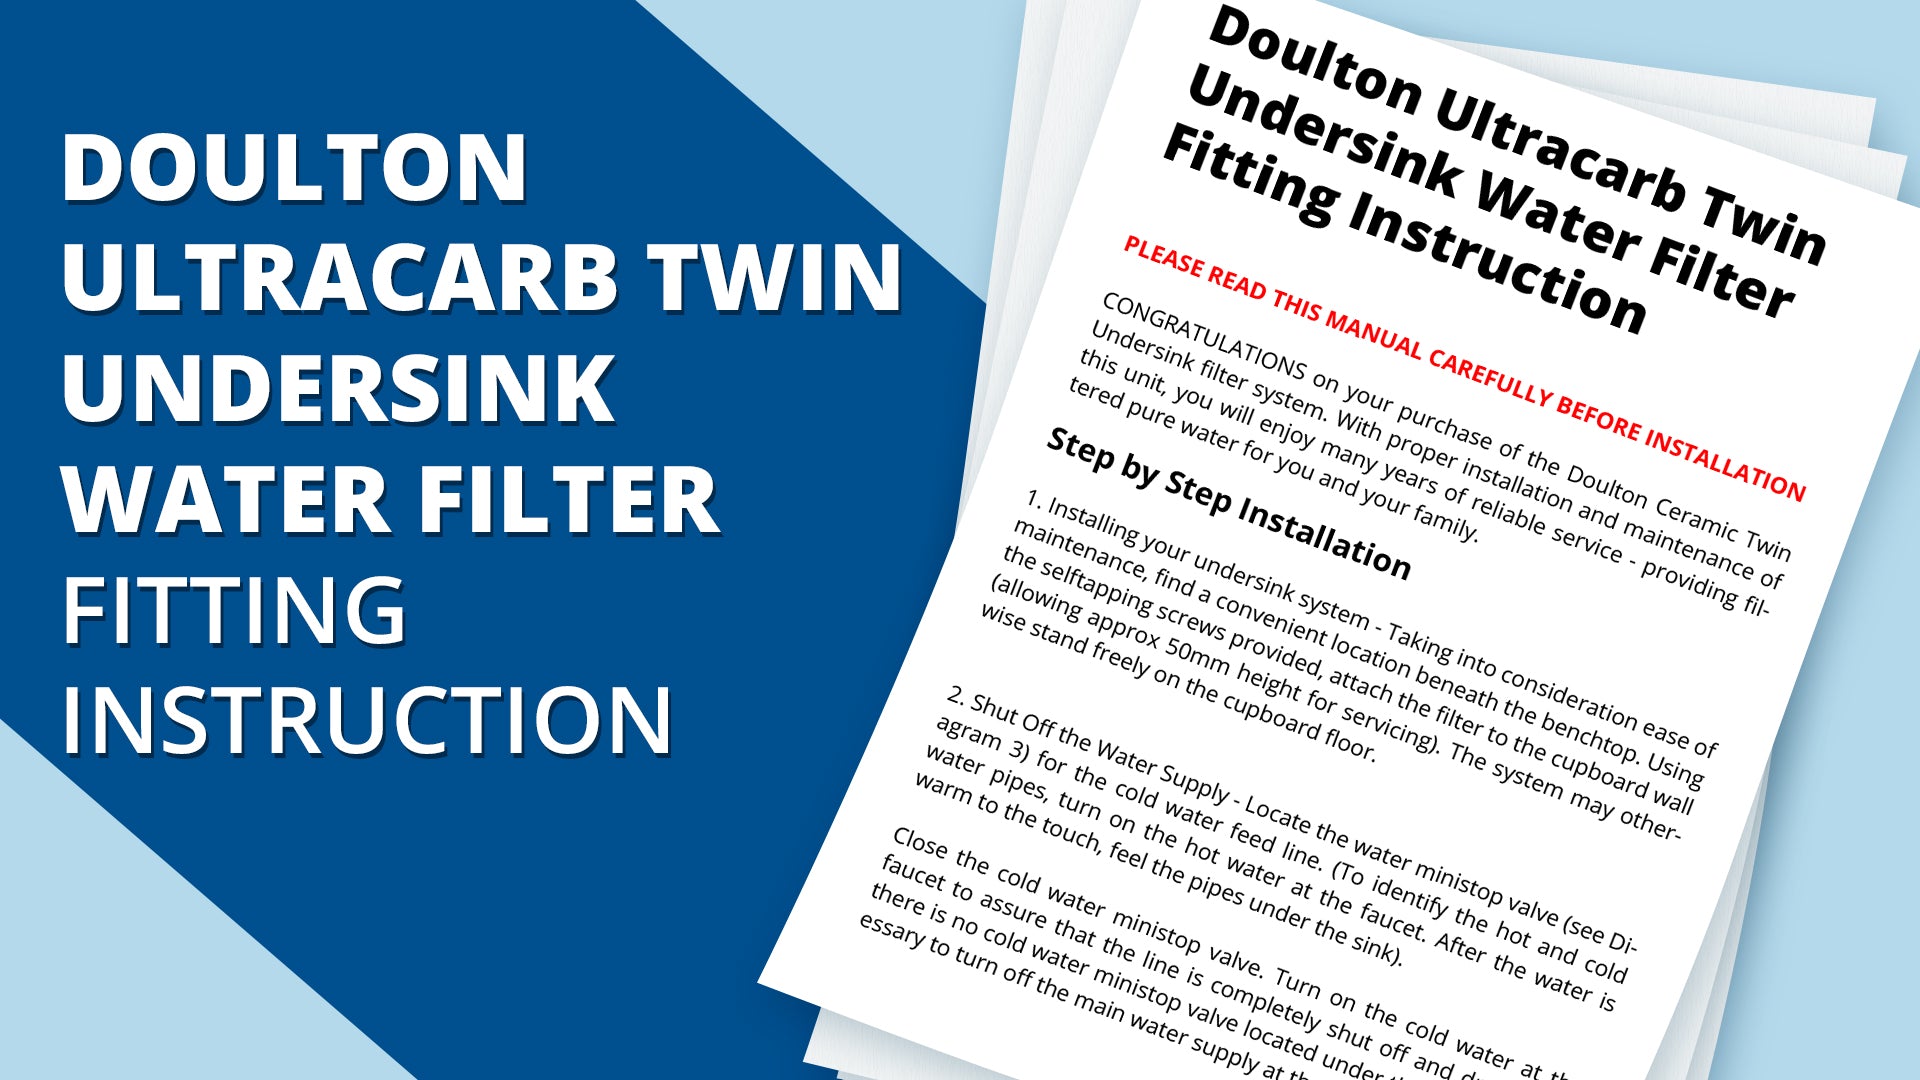 Doulton Ultracarb Twin Undersink Water Filter Fitting Instruction